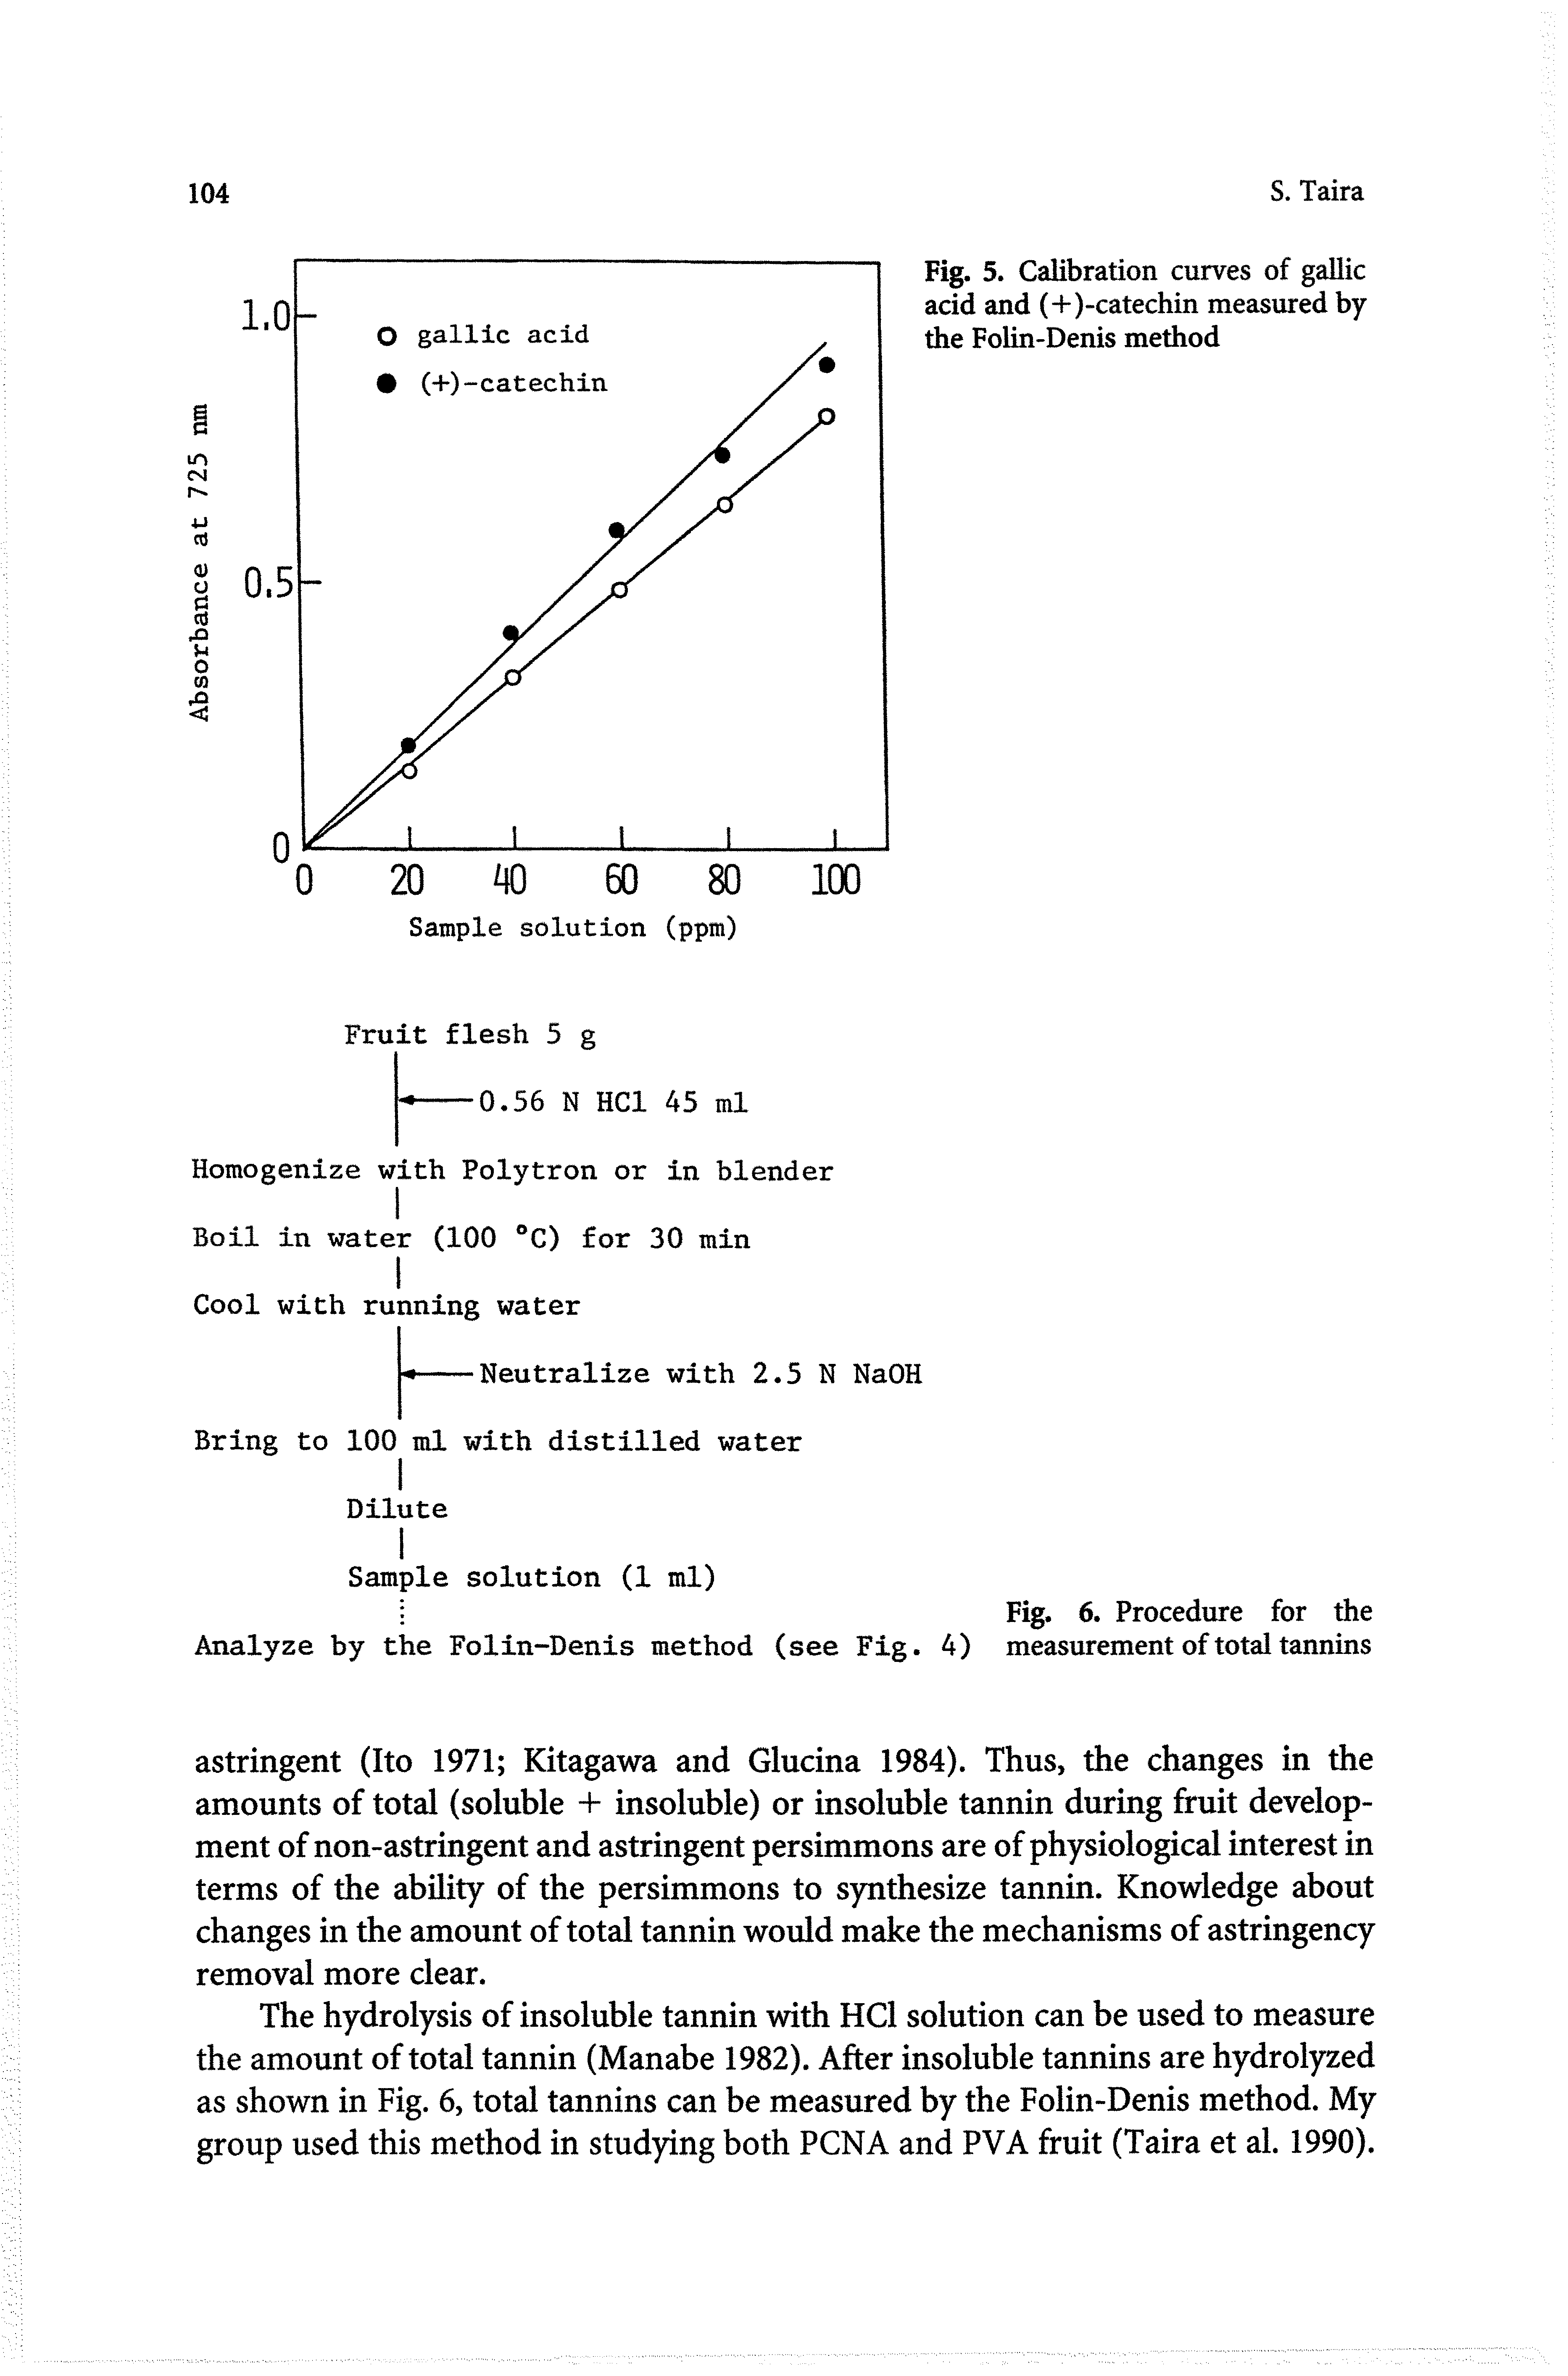 Fig. 5. Calibration curves of gallic acid and (+)-catechin measured by the Folin-Denis method...